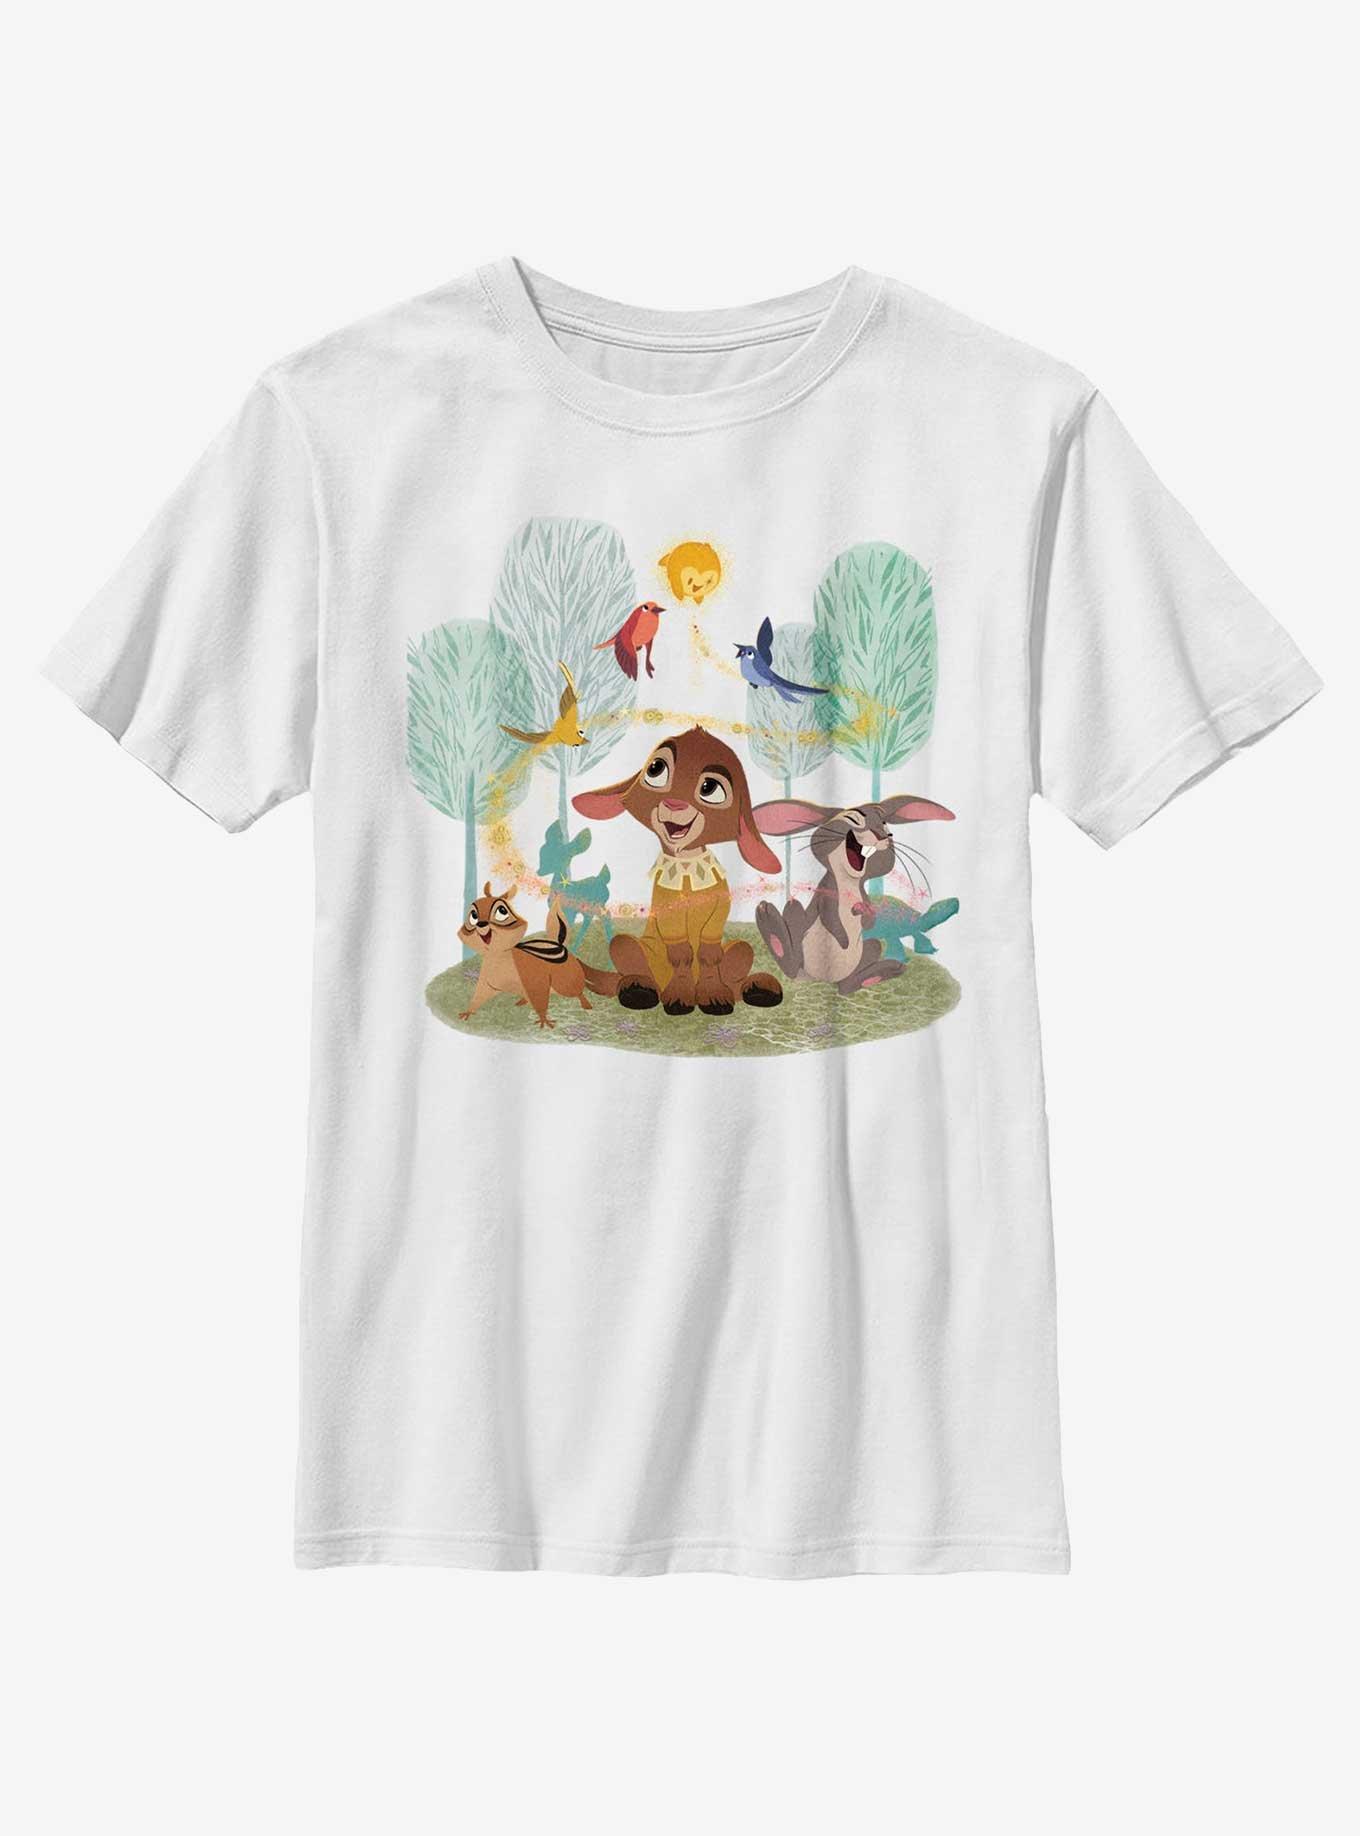 Disney Wish Star Valentino and Forest Friends Youth T-Shirt, WHITE, hi-res